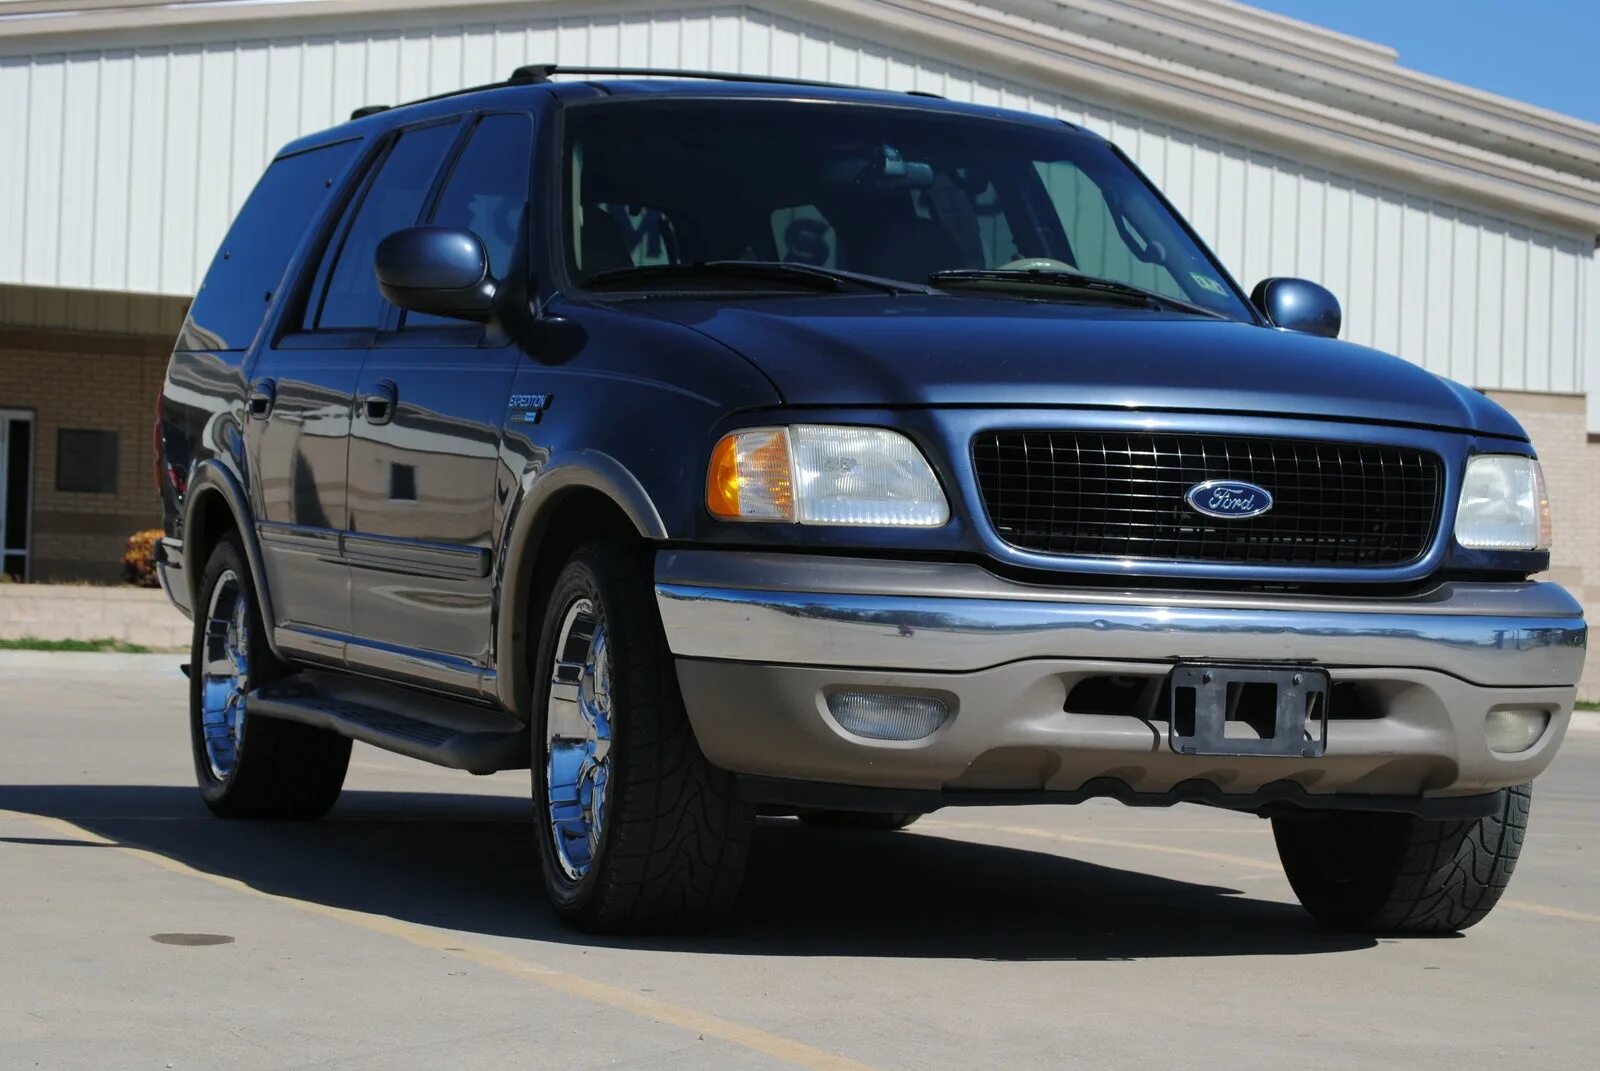 Ford Expedition 1997. Ford Expedition 2002. Ford Expedition 1998. Ford Expedition 1996.